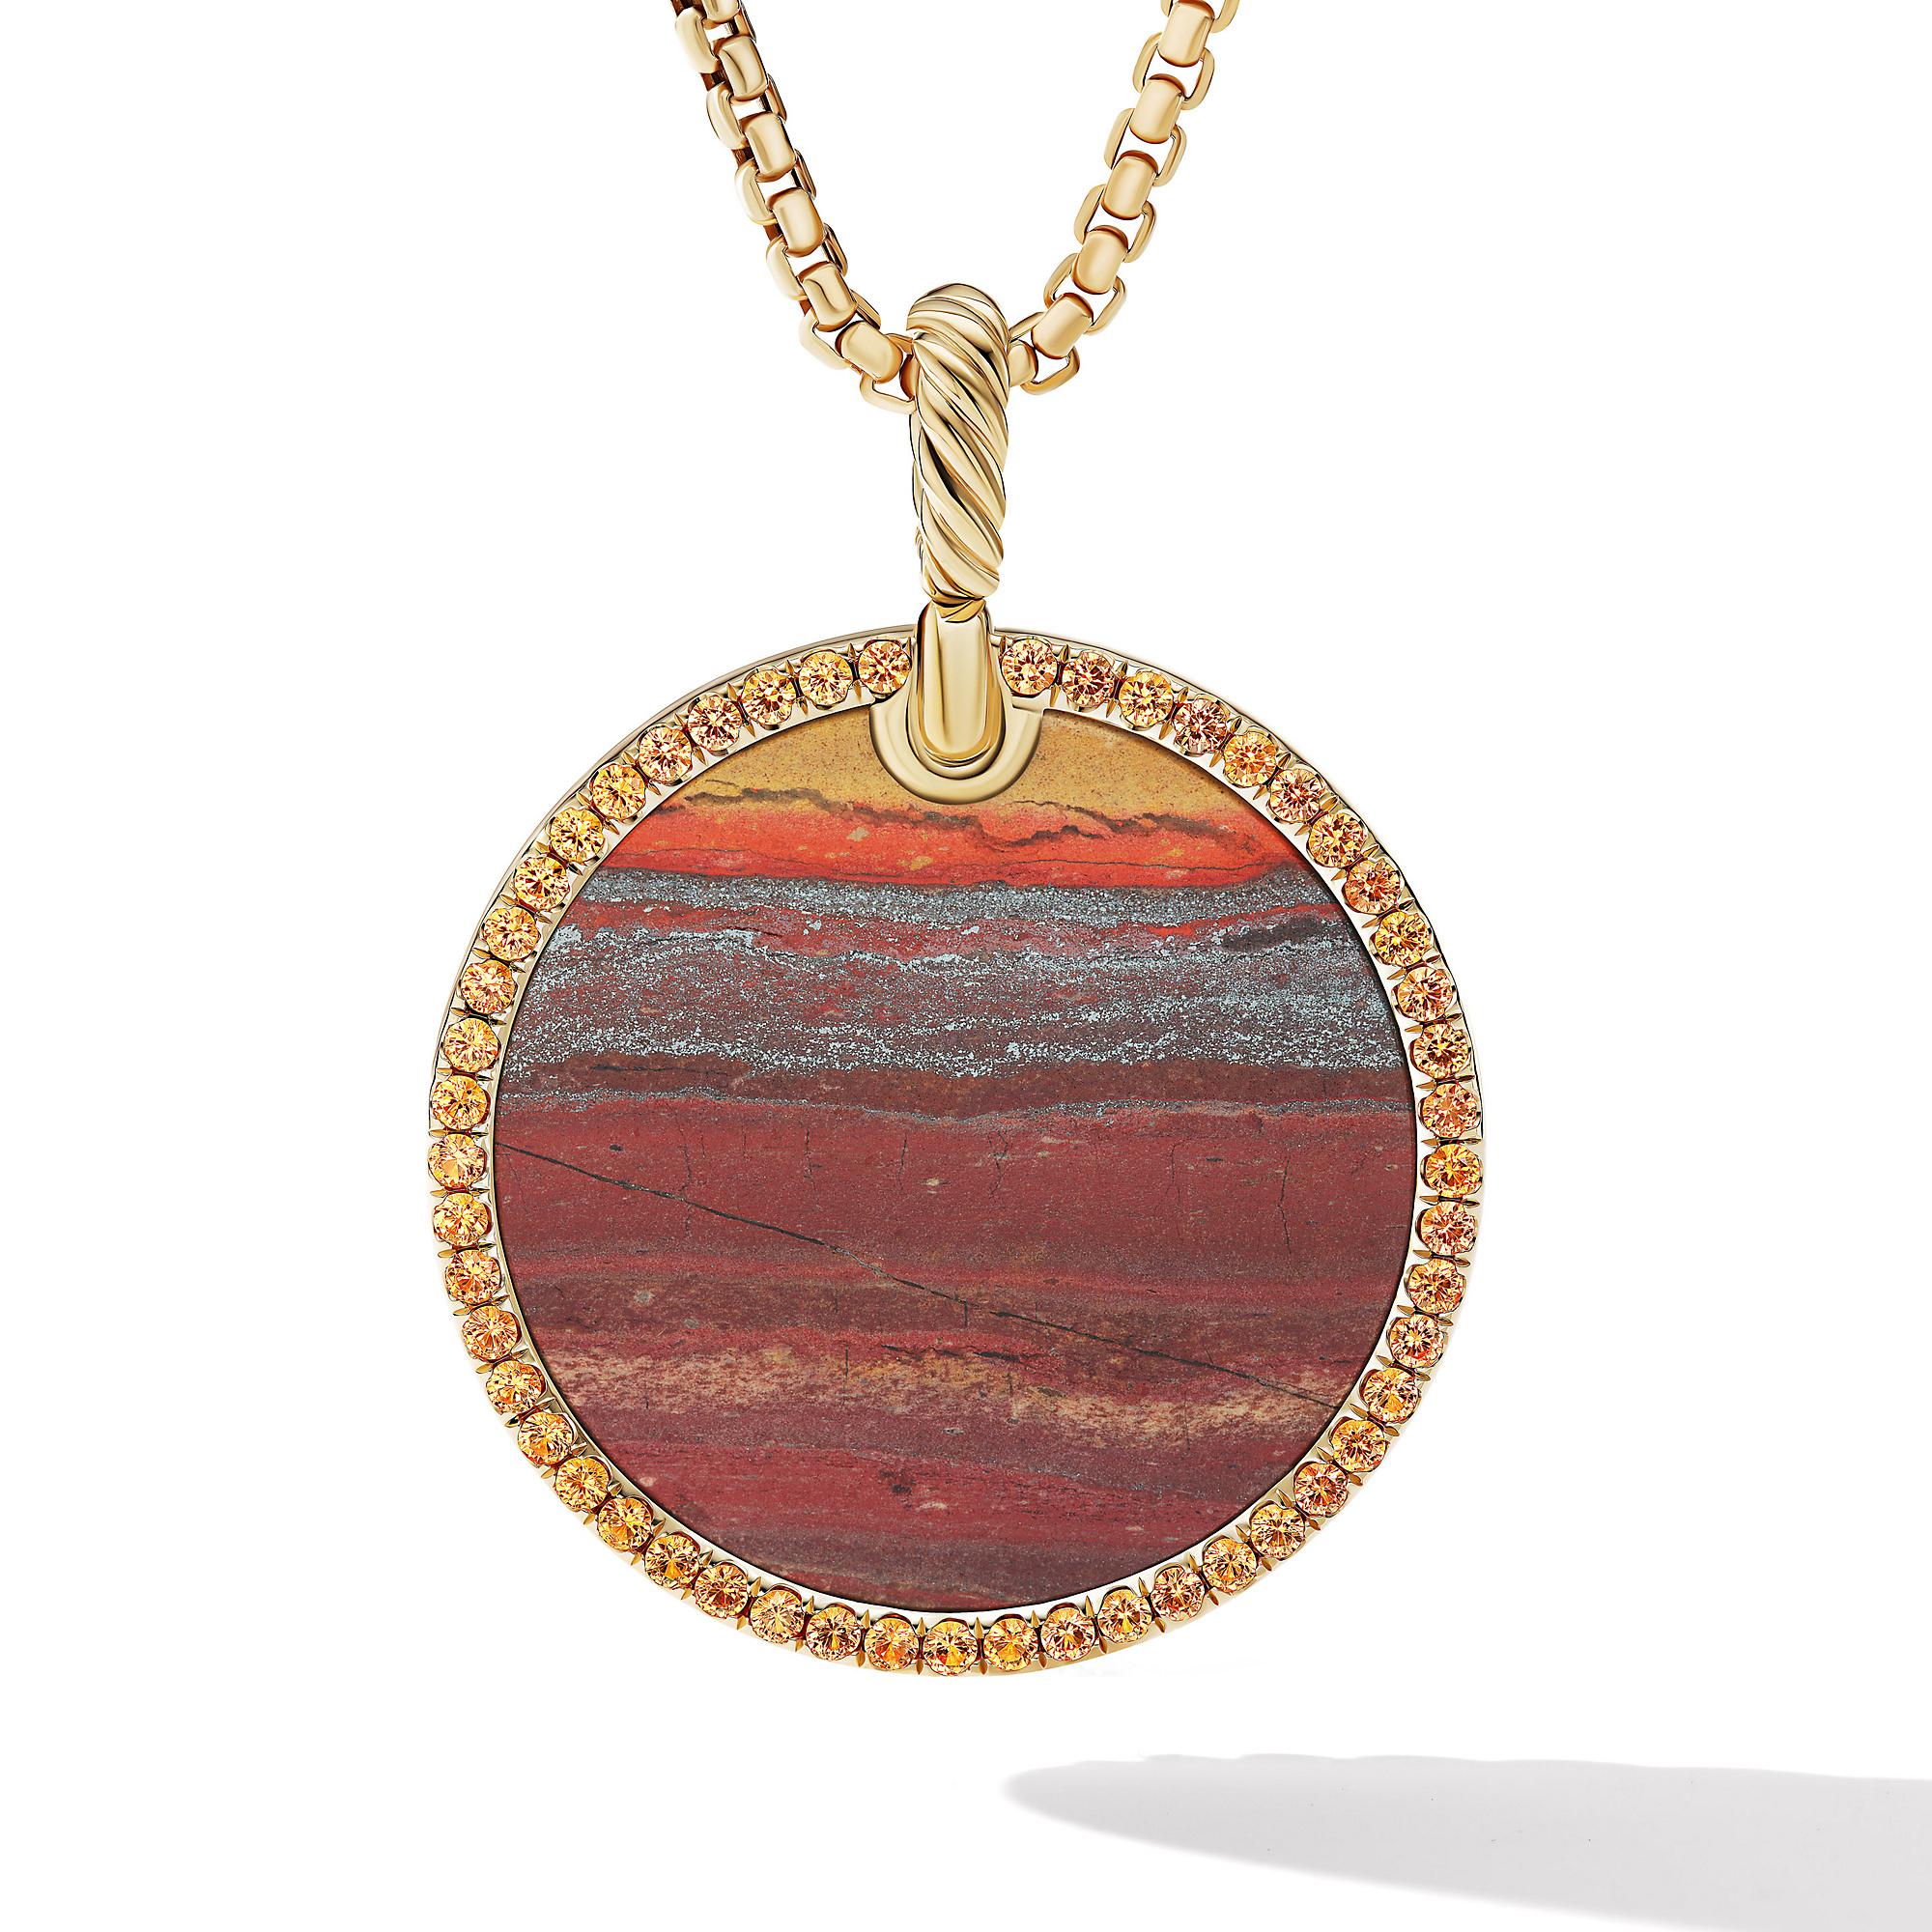 David Yurman DY Elements Artist Series Disc Pendant in 18K Yellow Gold with Jasper and Pave Orange Sapphires